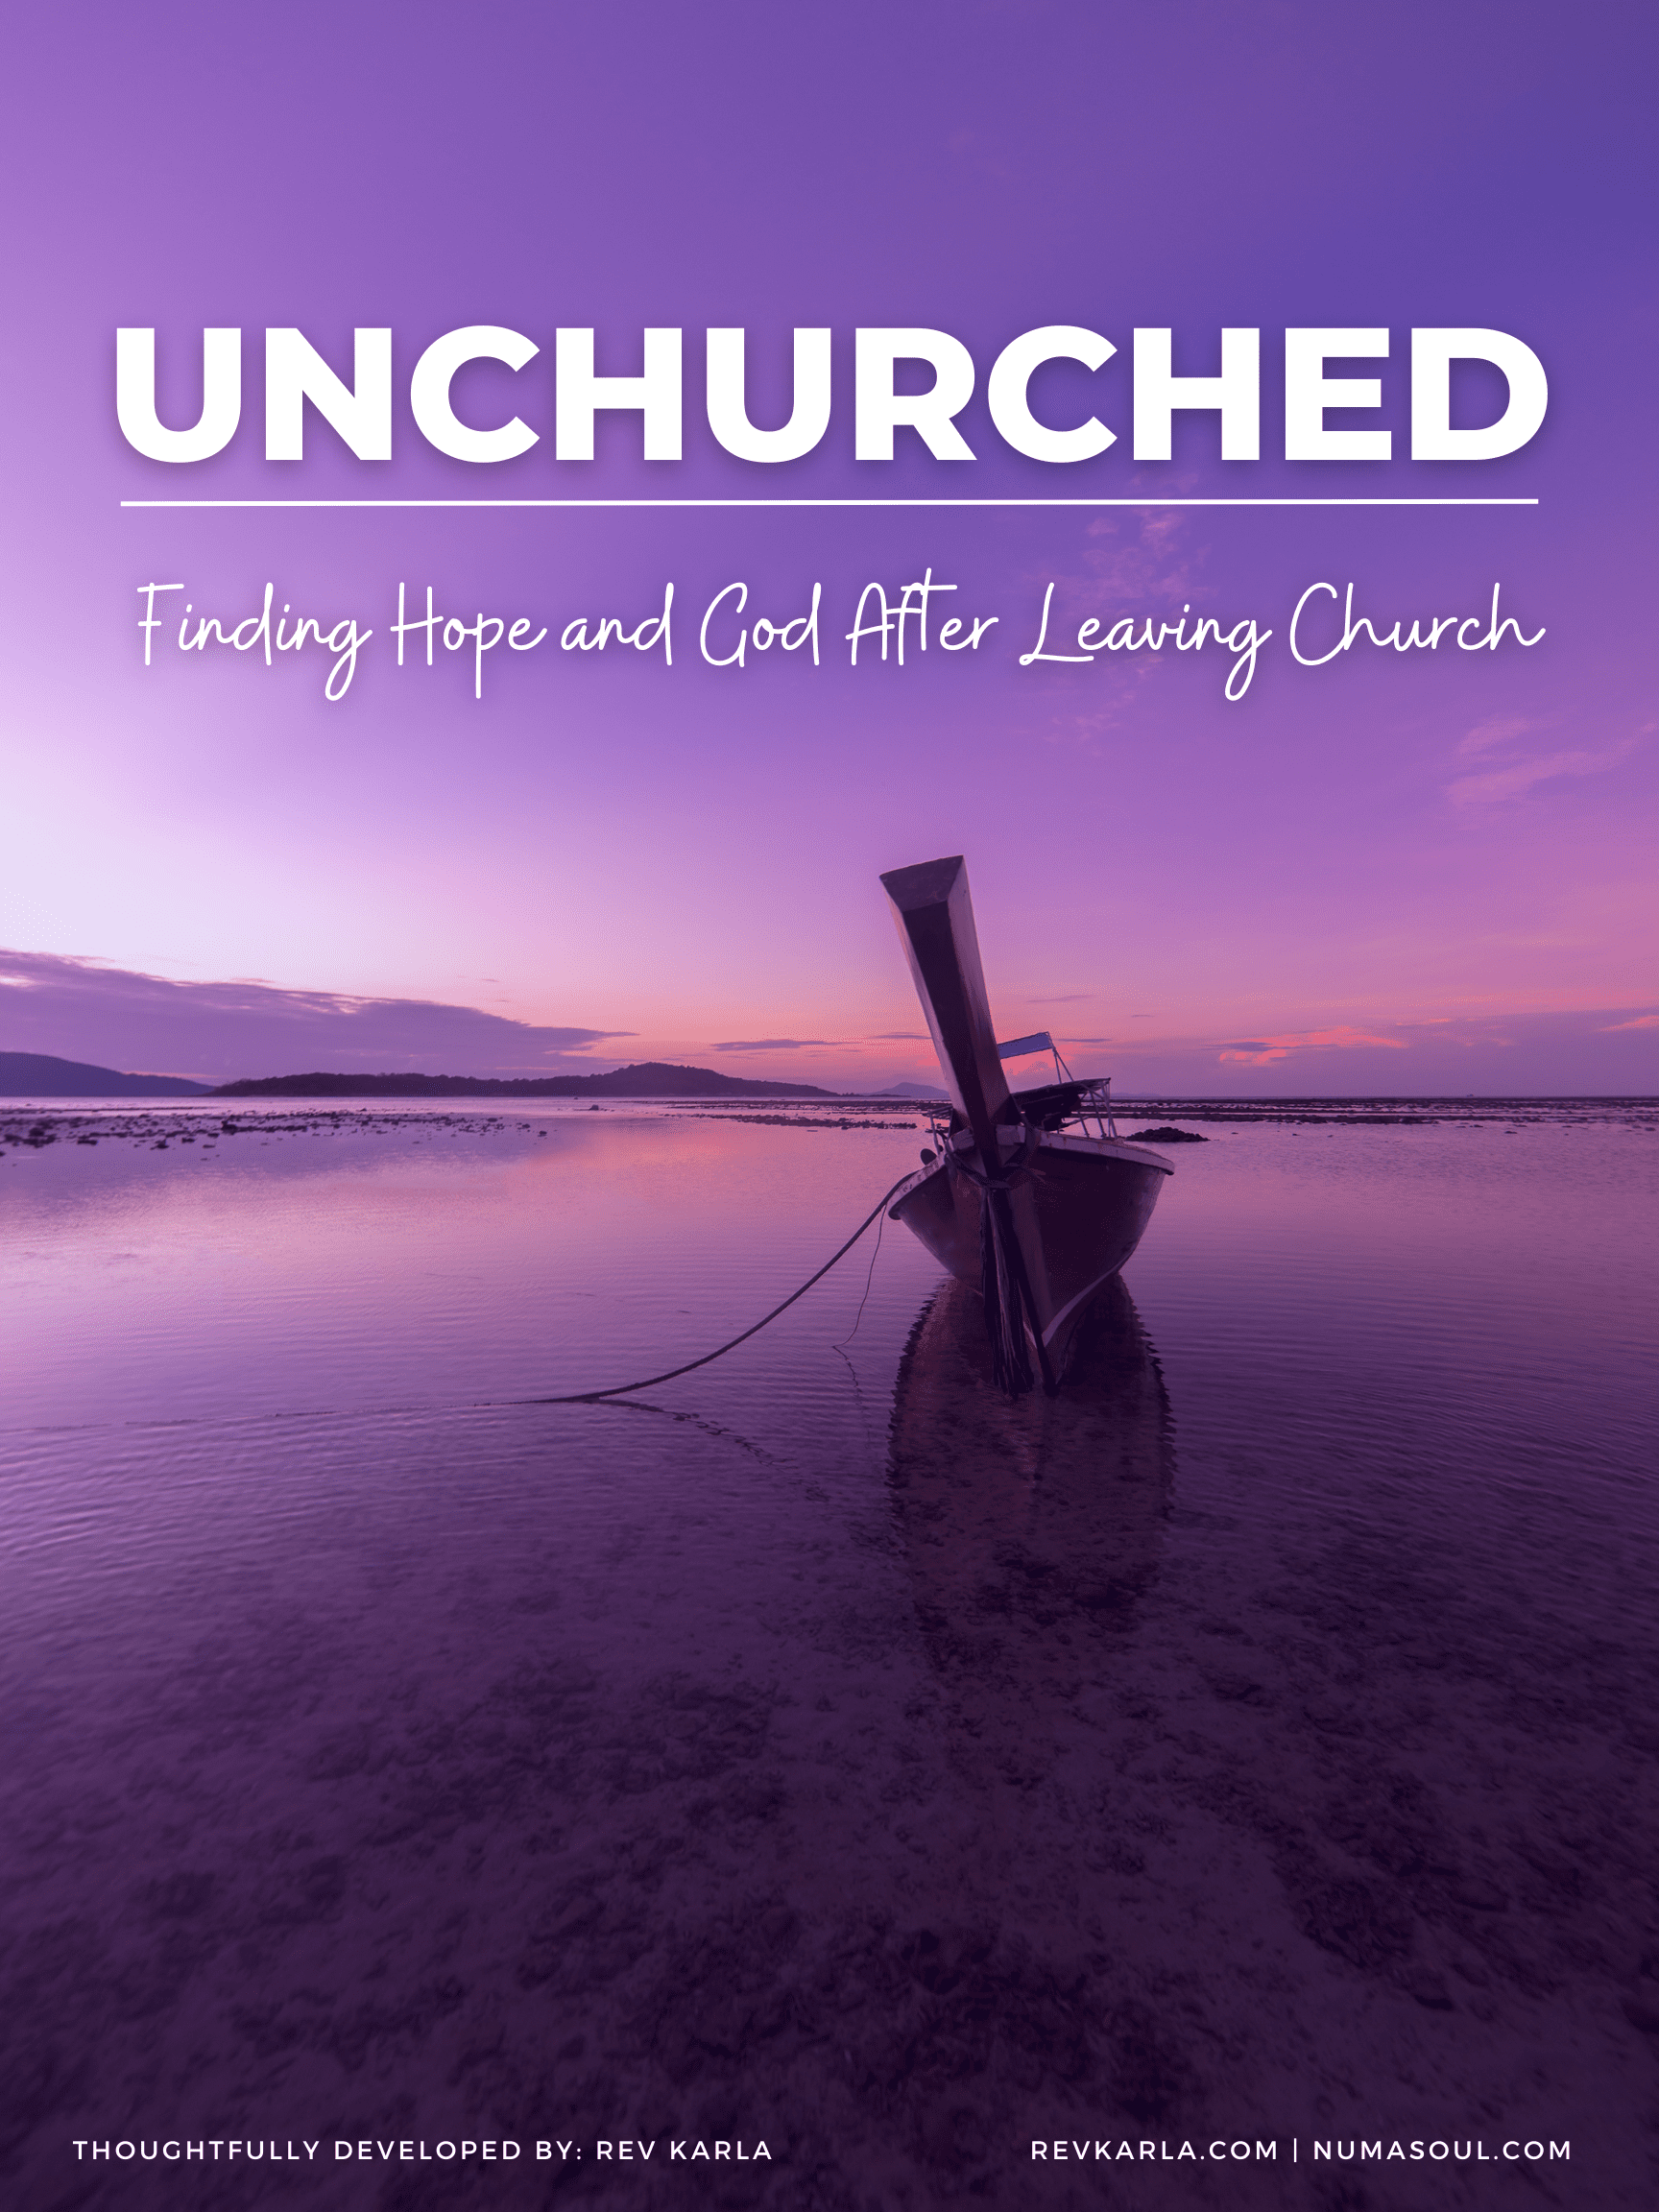 Unchurched Course Cover